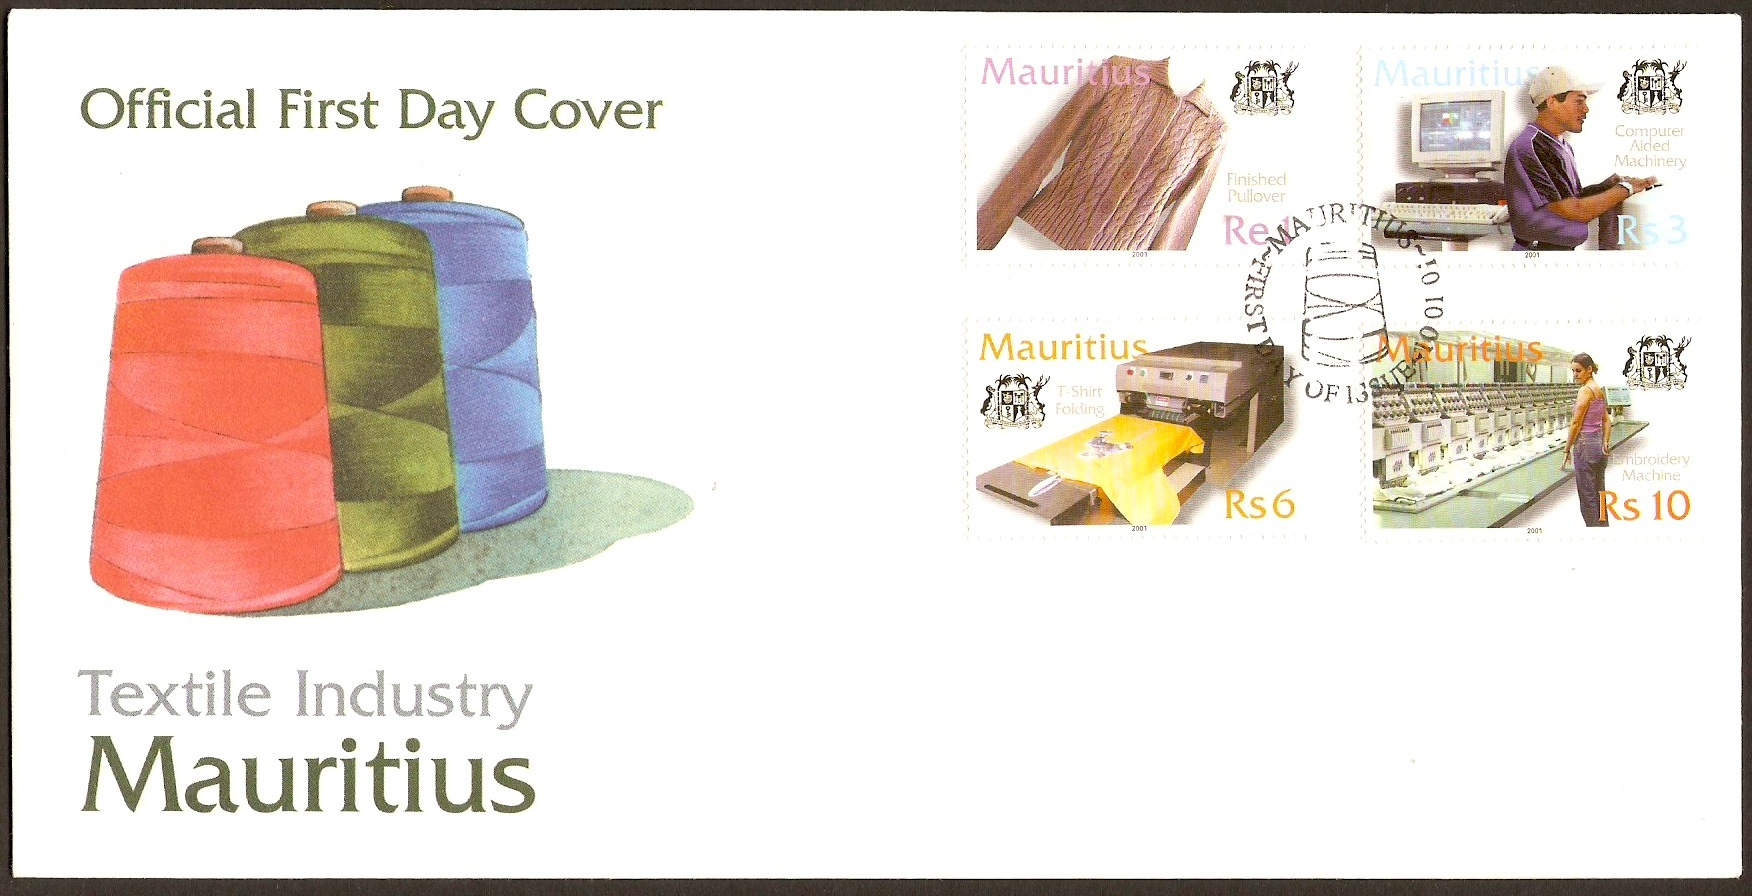 Mauritius 2000 Textile Industry Series FDC.